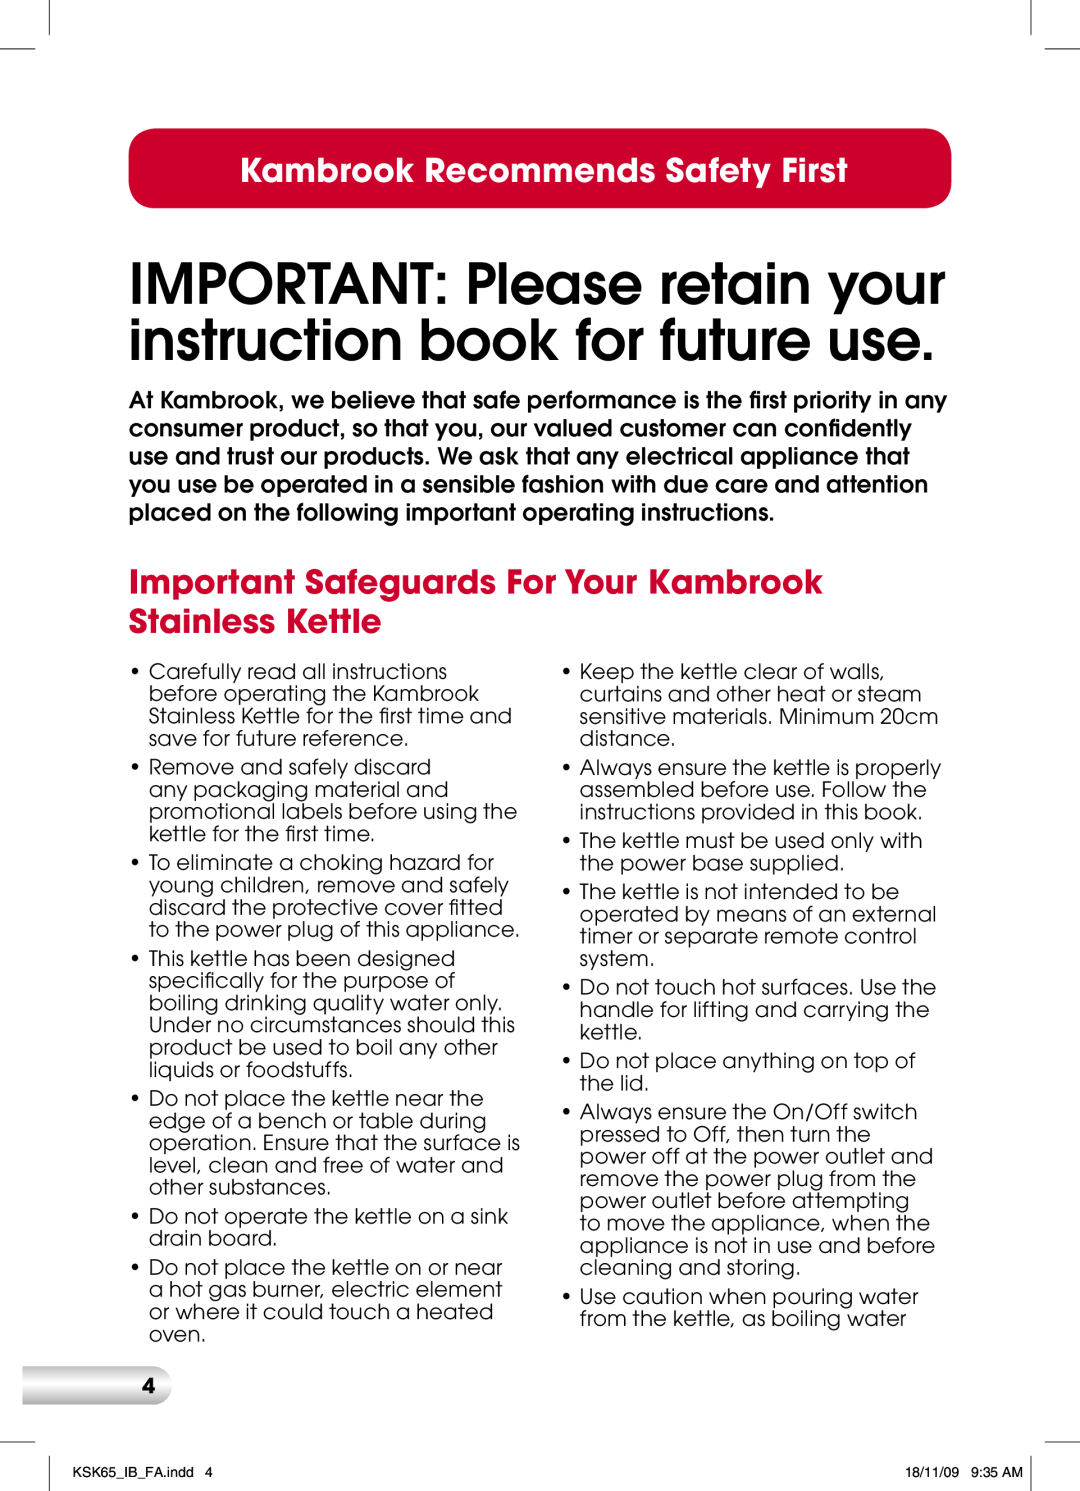 Kambrook KSK65 manual Important Safeguards For Your Kambrook Stainless Kettle, Kambrook Recommends Safety First 